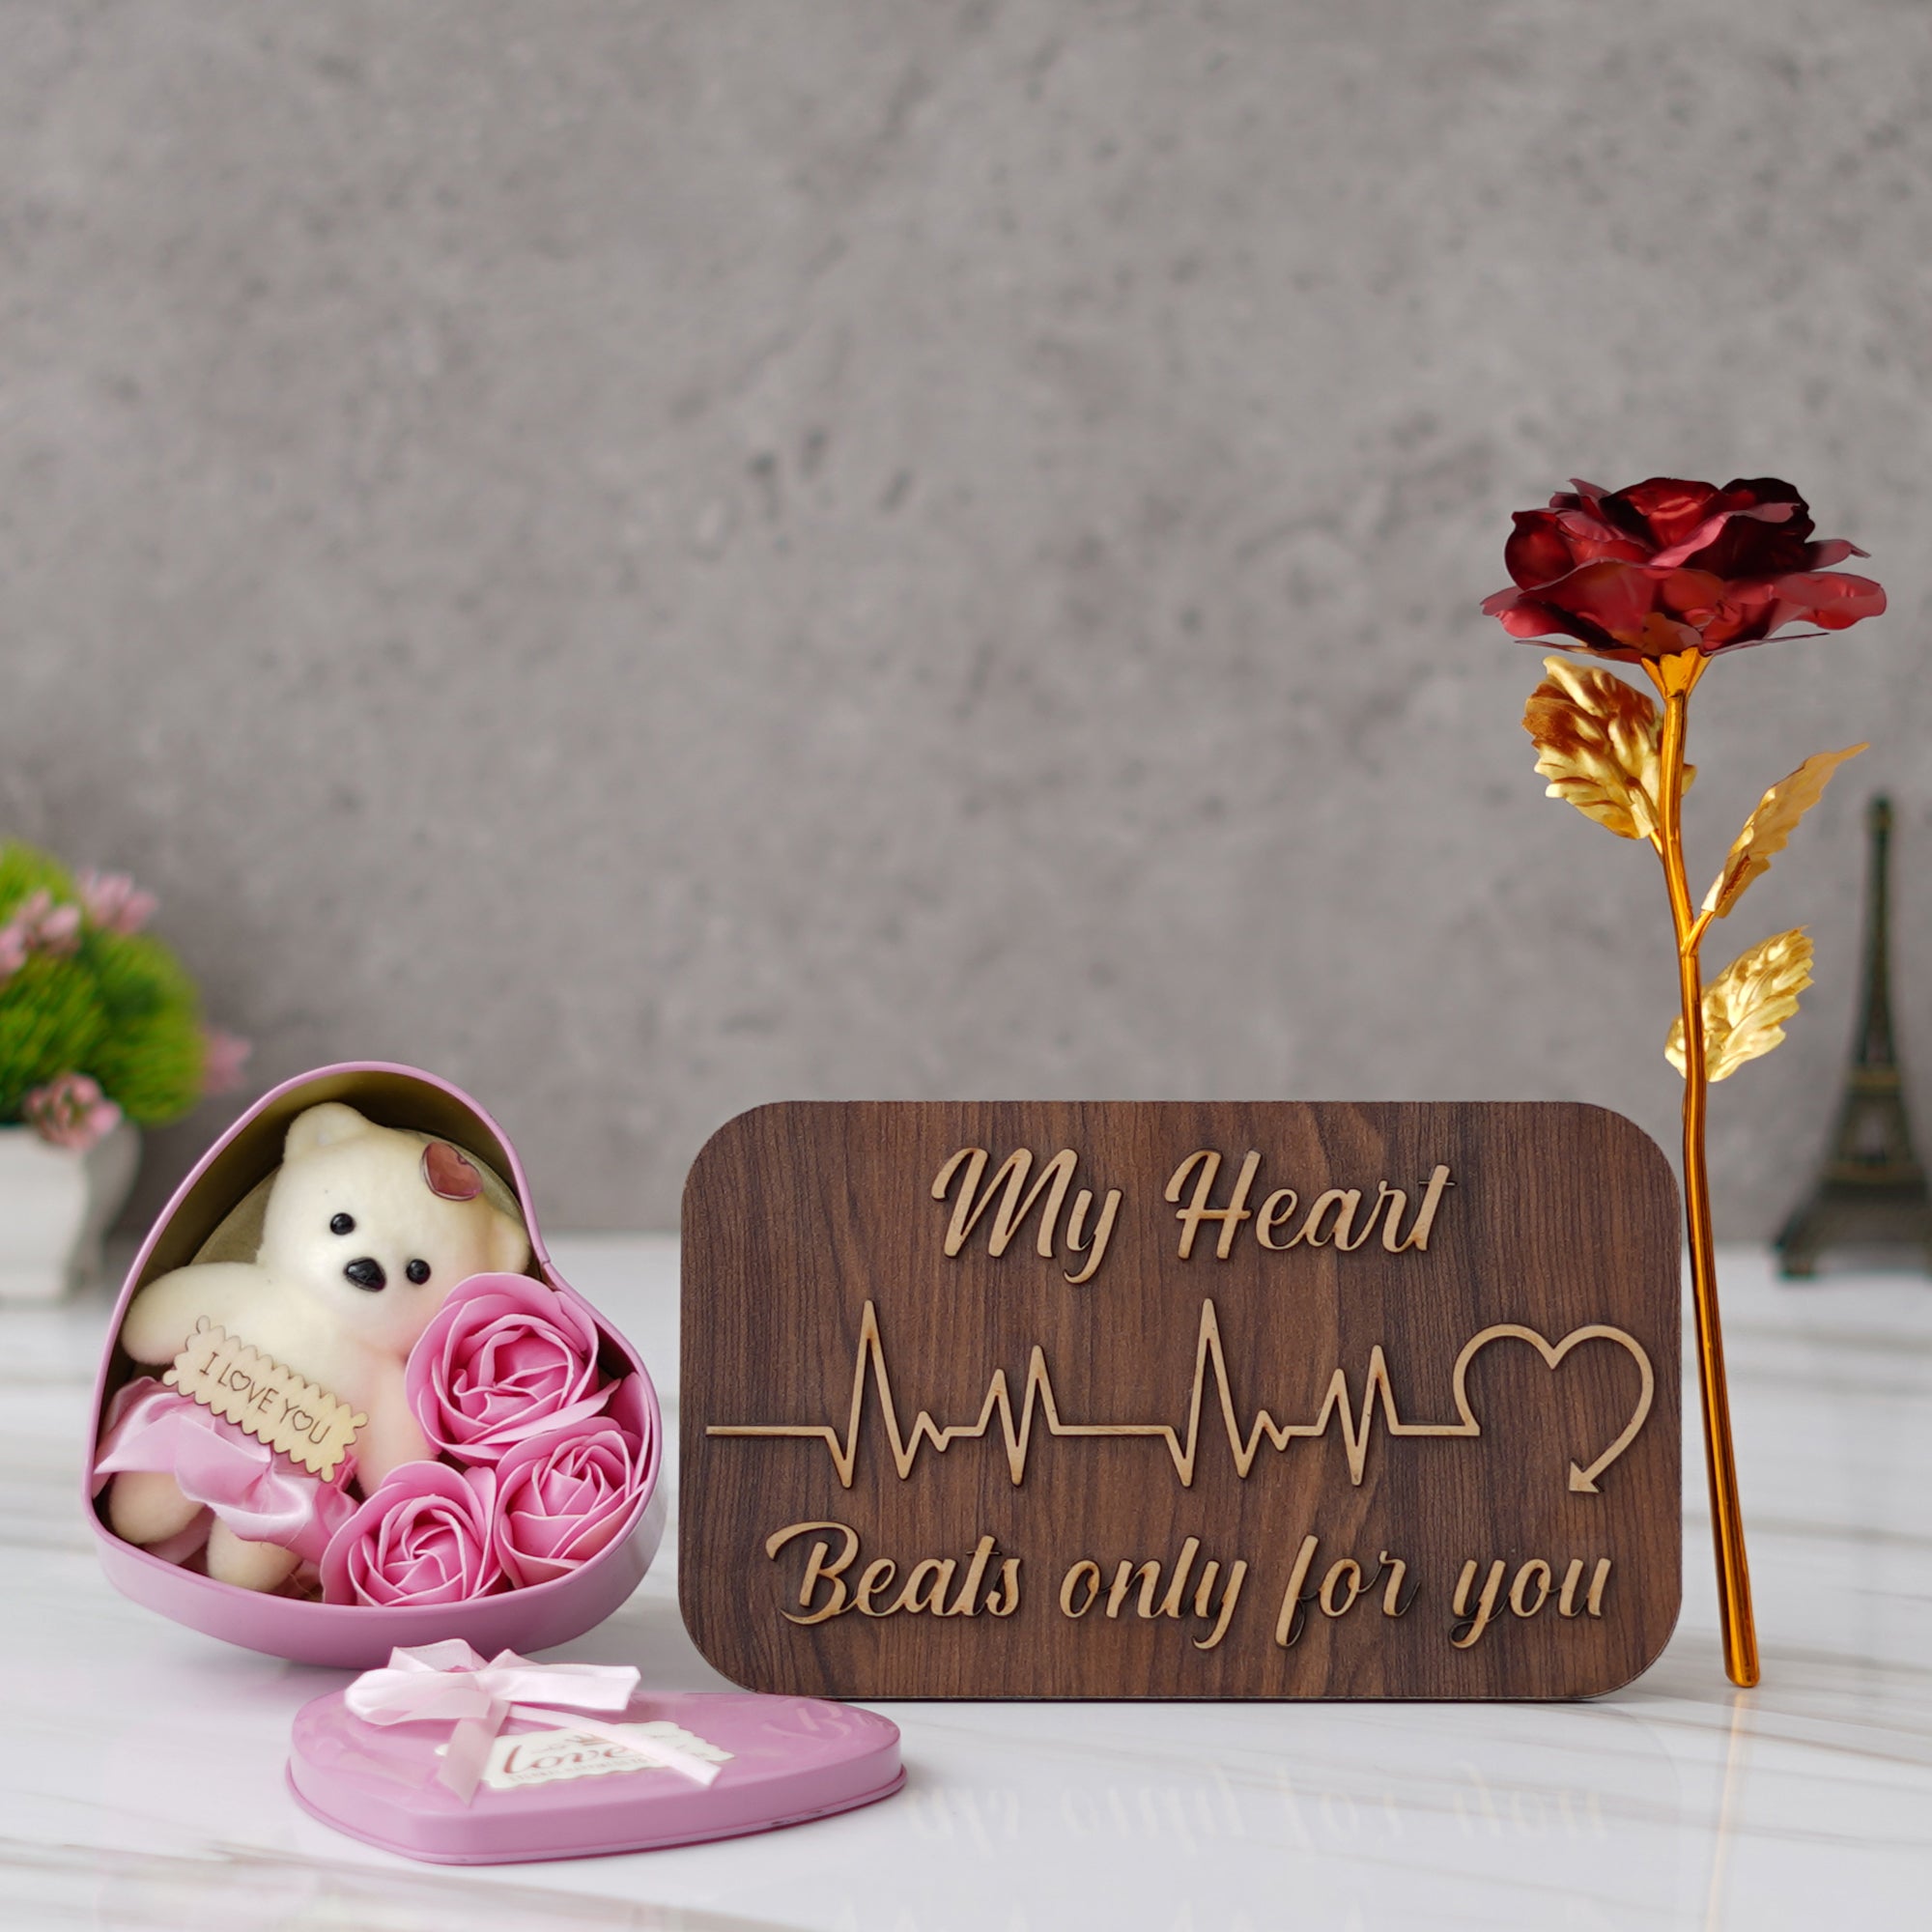 Valentine Combo of Golden Red Rose Gift Set, "My Heart Beats Only For You" Wooden Showpiece With Stand, Pink Heart Shaped Gift Box with Teddy and Roses